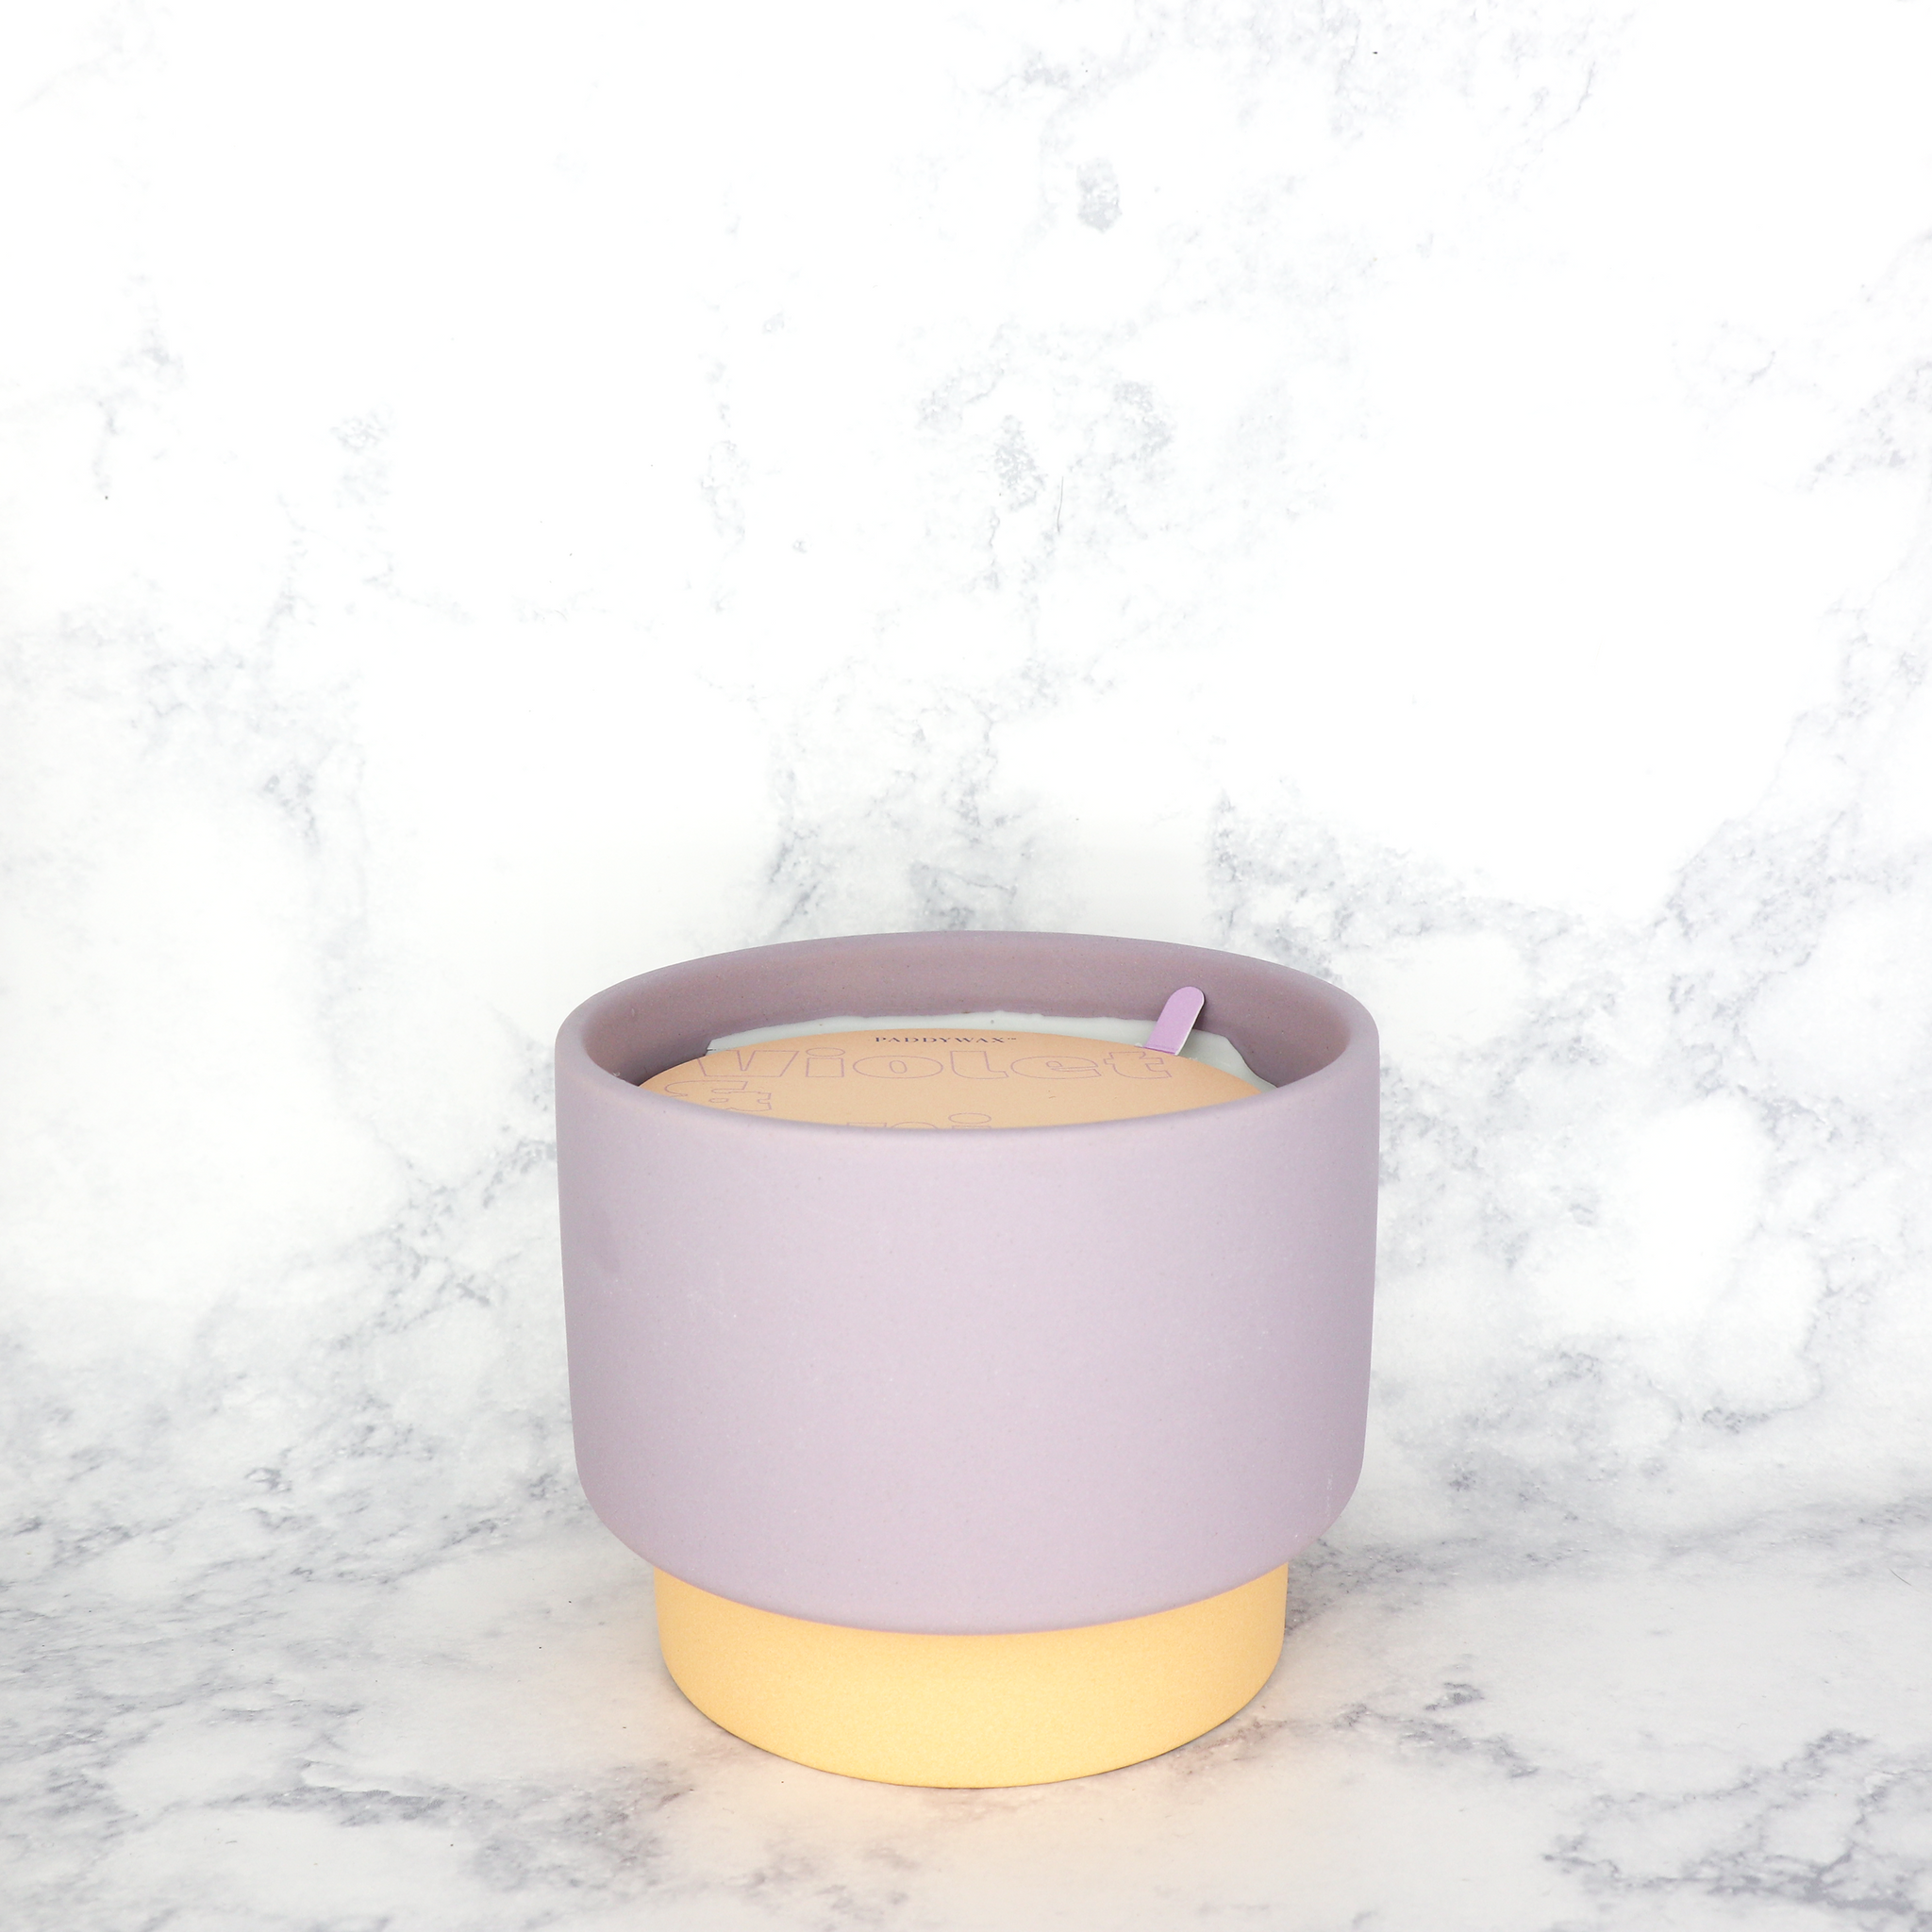 Violet & Vanilla Colorblock Ceramic Soy Wax Large Candle